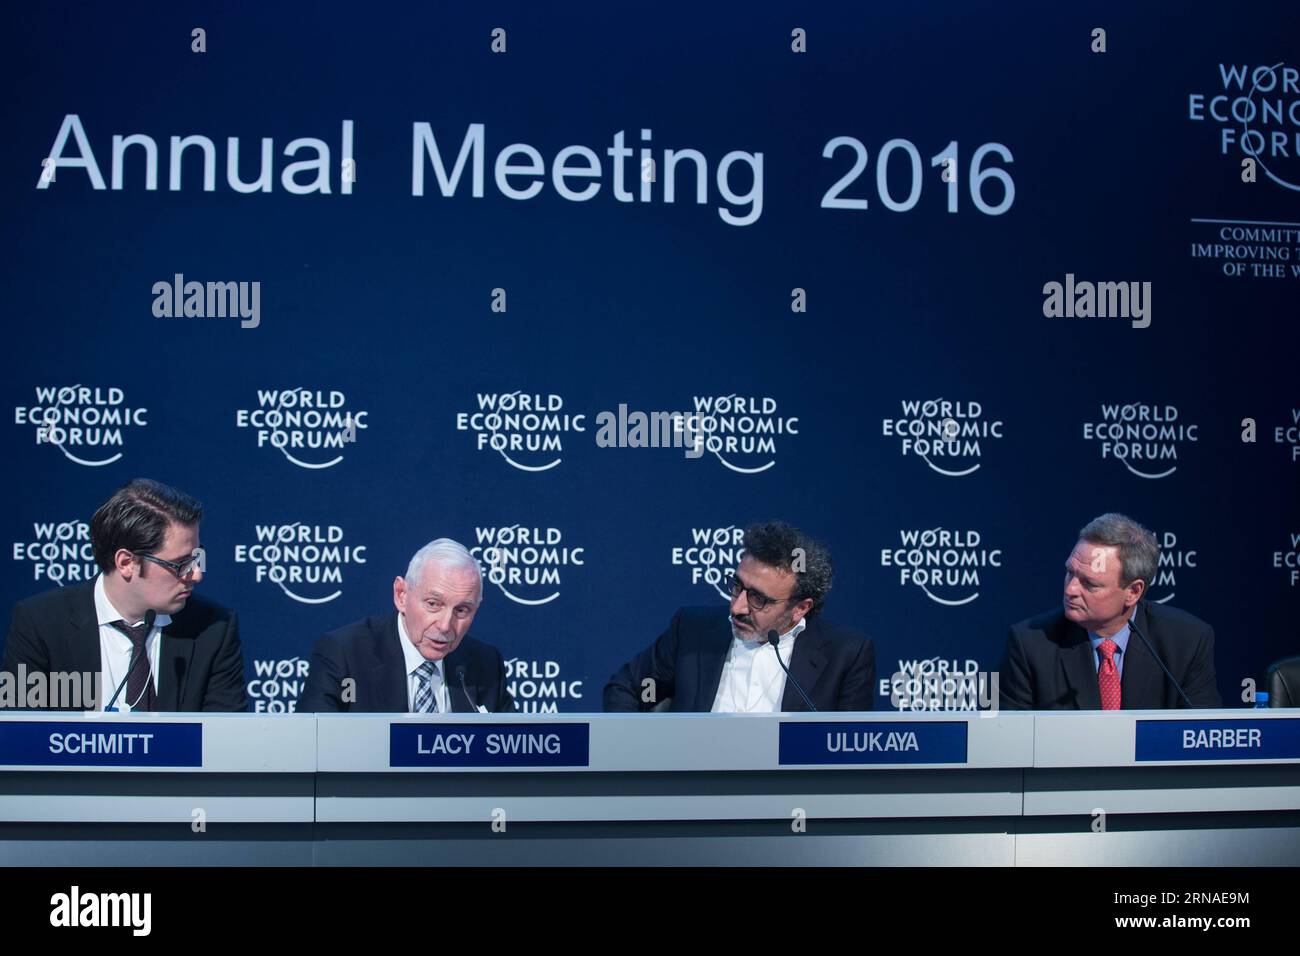 (160122) -- DAVOS, Jan. 22, 2016 -- William Lacy Swing (2nd L), director general of the International Organization for Migration (IOM), Hamdi Ulukaya (2nd R), founder of American yogurt producer Chobani, and Jim Barber (1st R), president of UPS International, hold a joint press conference in Davos, Switzerland, Jan. 22, 2016. Yoghurt empire founder Hamdi Ulukaya announced in Davos that his Tent Foundation will partner with Airbnb, LinkedIn, MasterCard, UPS and IKEA Foundation to address the global refugee crisis. ) SWITZERLAND-DAVOS-REFUGEE CRISIS XuxJinquan PUBLICATIONxNOTxINxCHN   160122 Dav Stock Photo